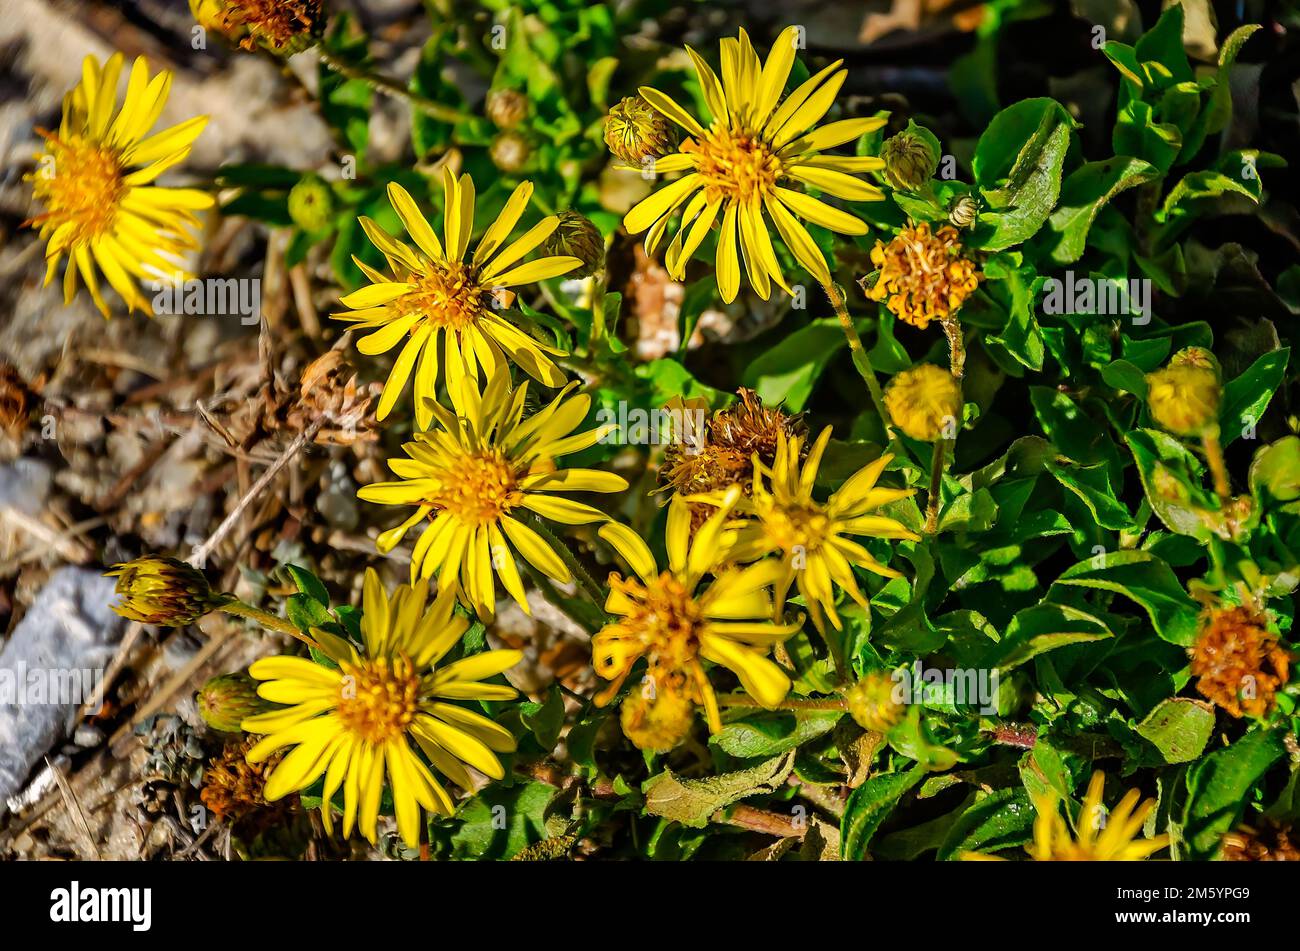 Camphorweed (Heterotheca subaxillaris), grows wild, Dec. 28, 2022, in Biloxi, Mississippi. Camphorweed is a North American species of flowering plant. Stock Photo